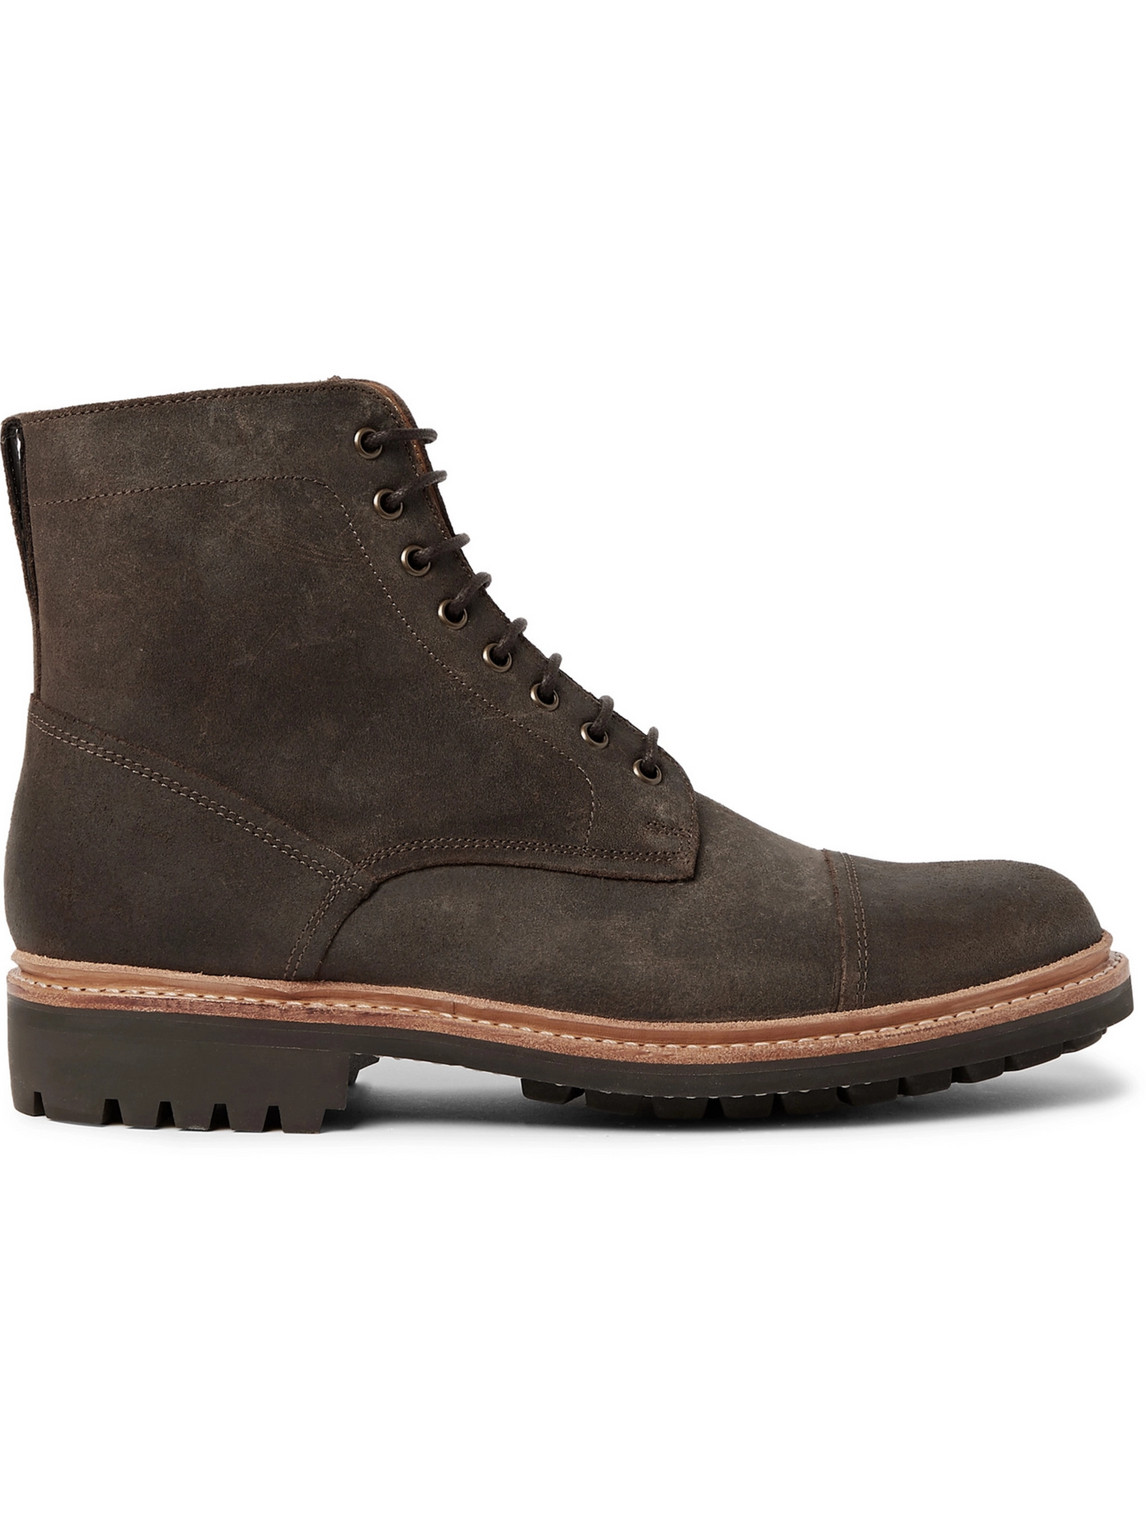 grenson brady brushed suede boots